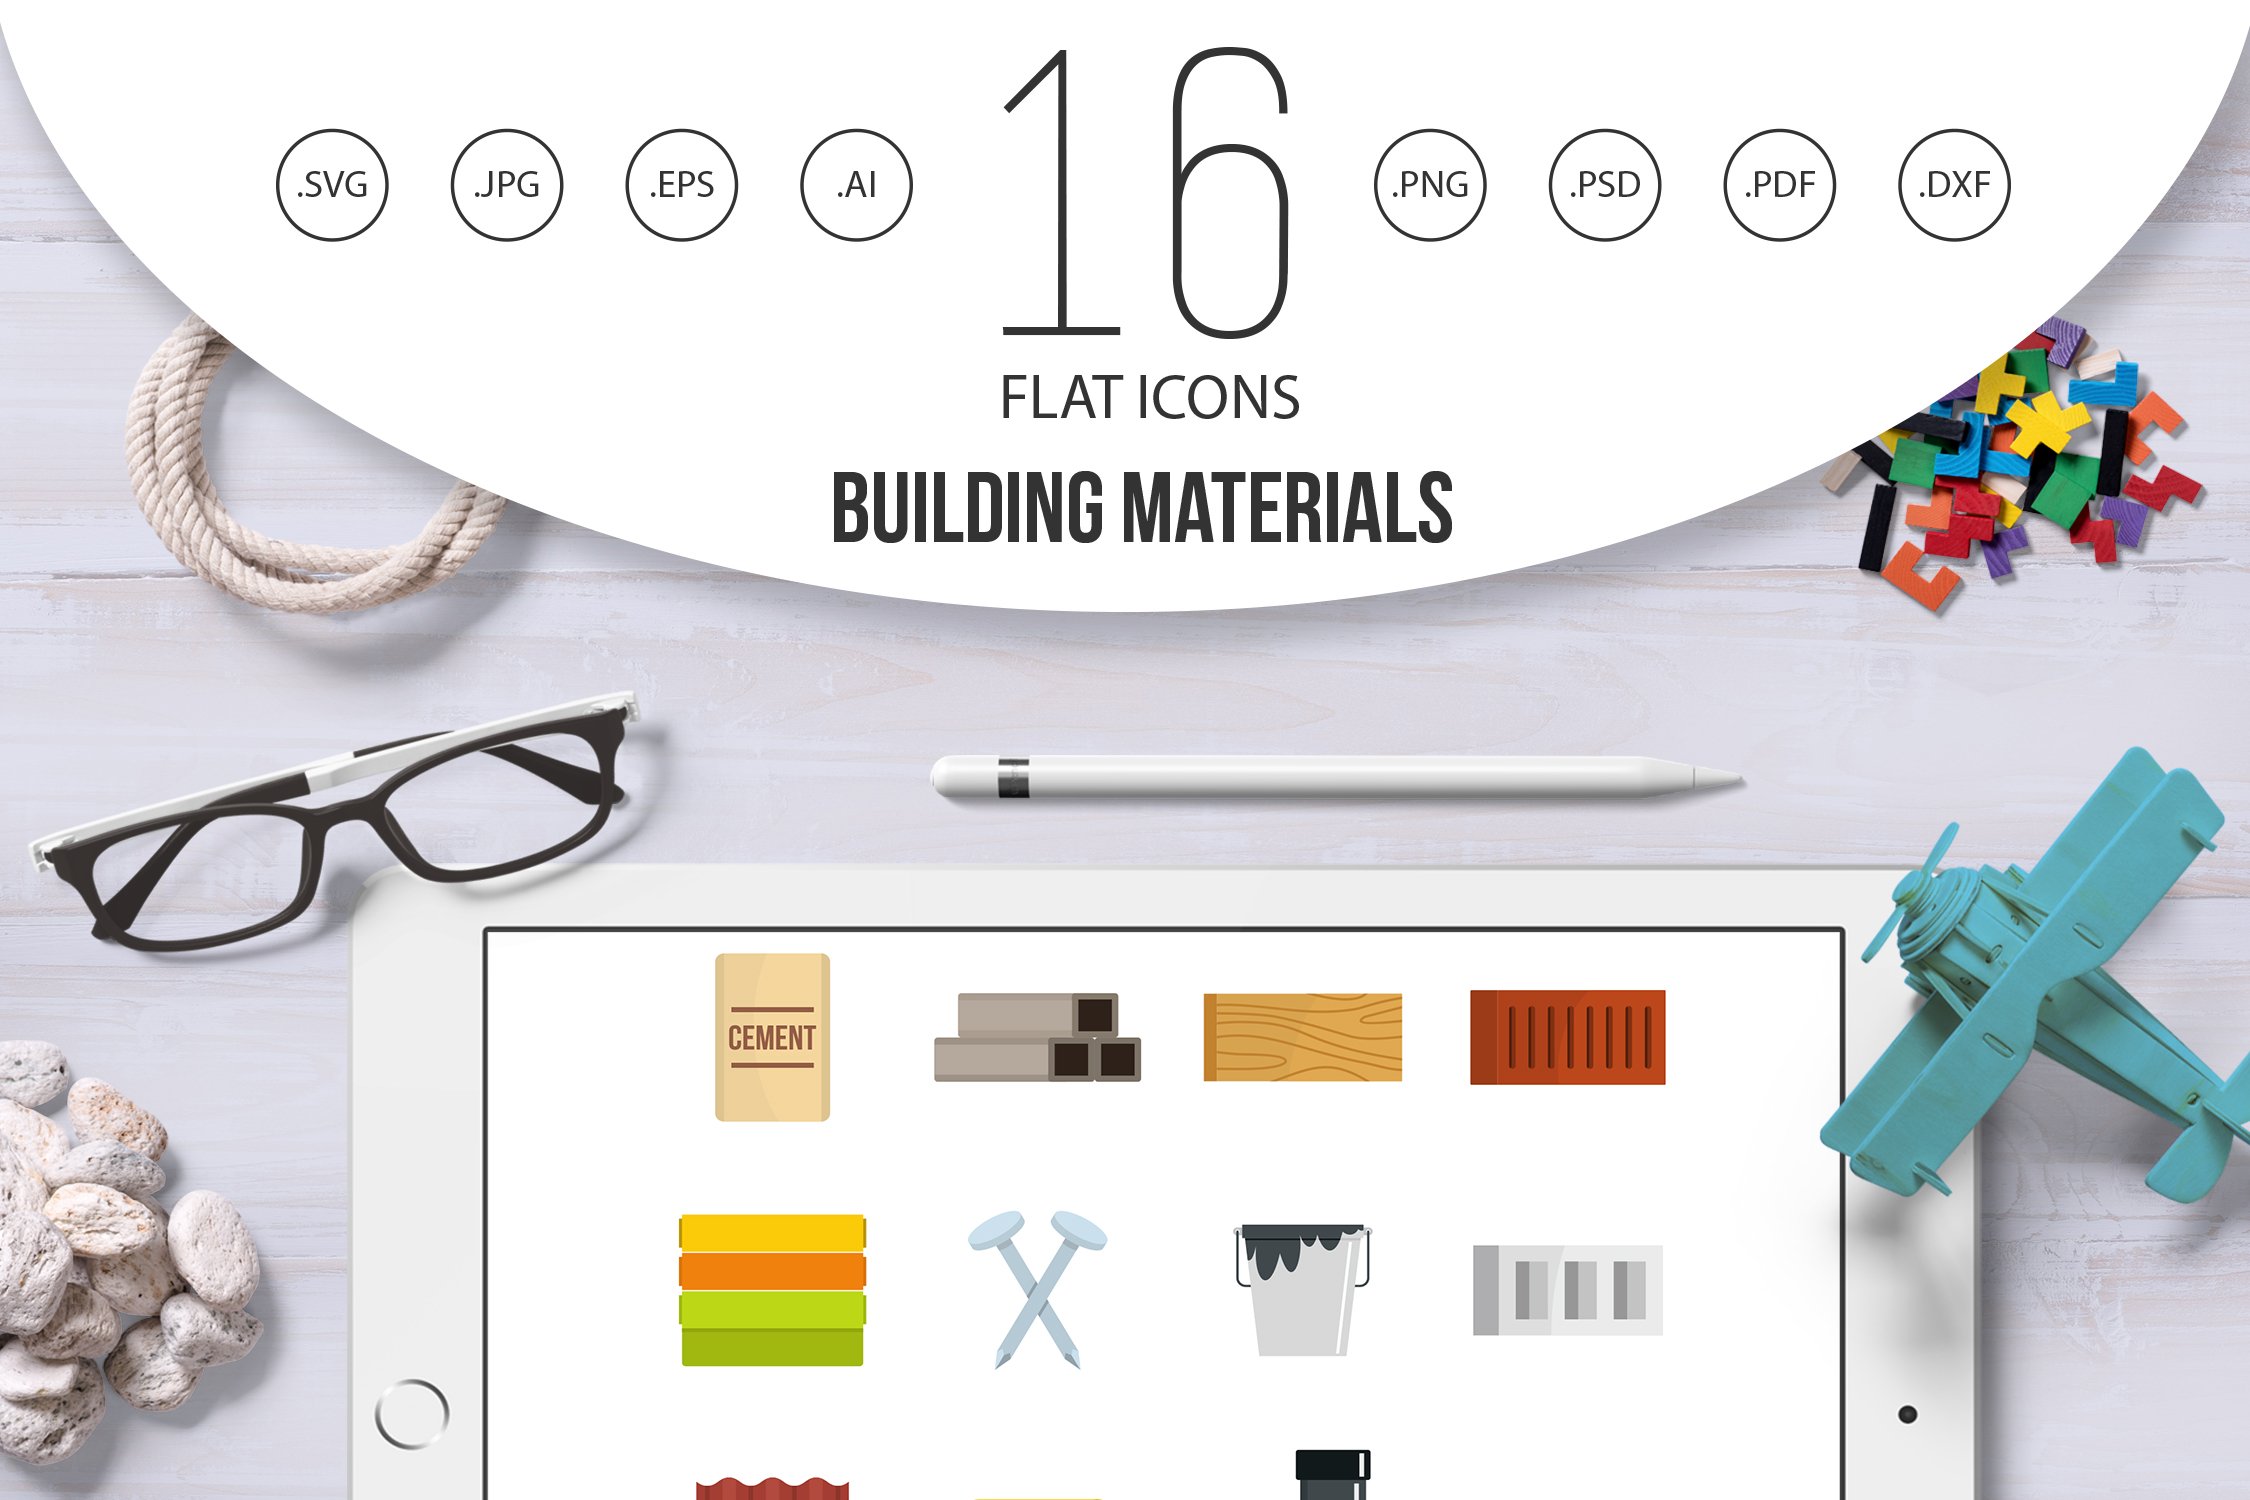 Building materials icons set in flat cover image.